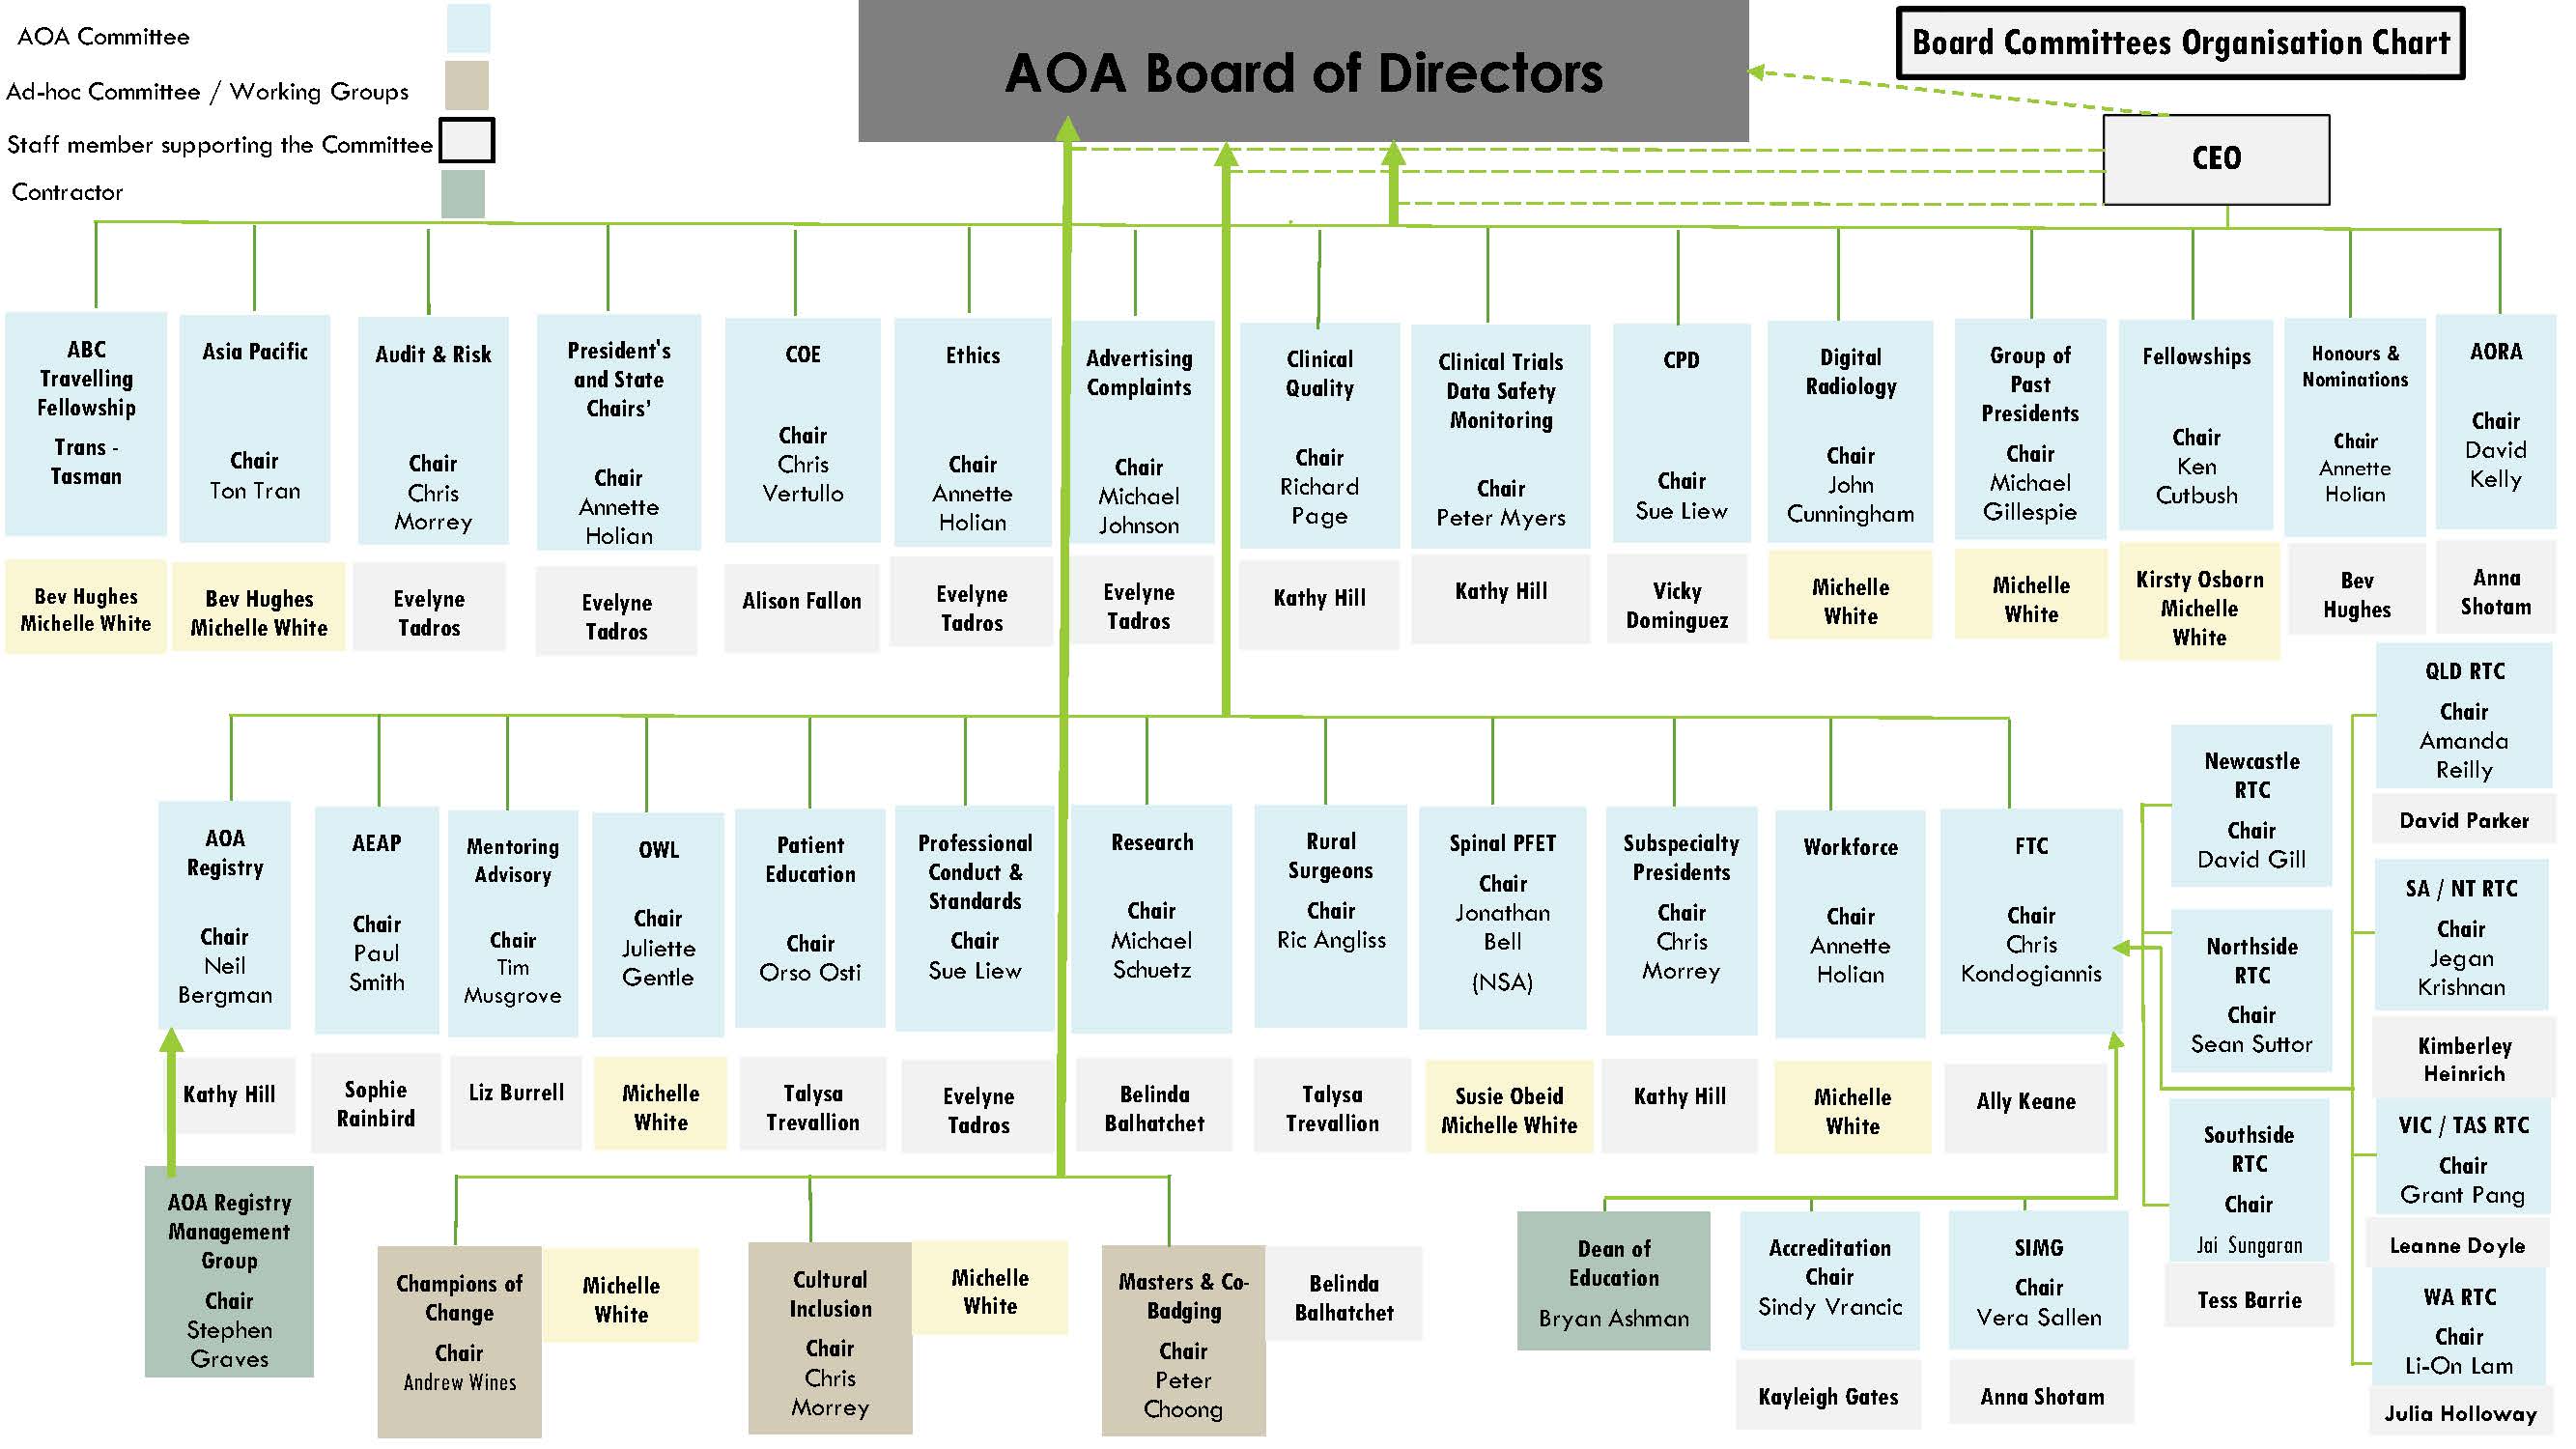 Organisation chart for Board Committees and staff supporting committees_Aug 2022